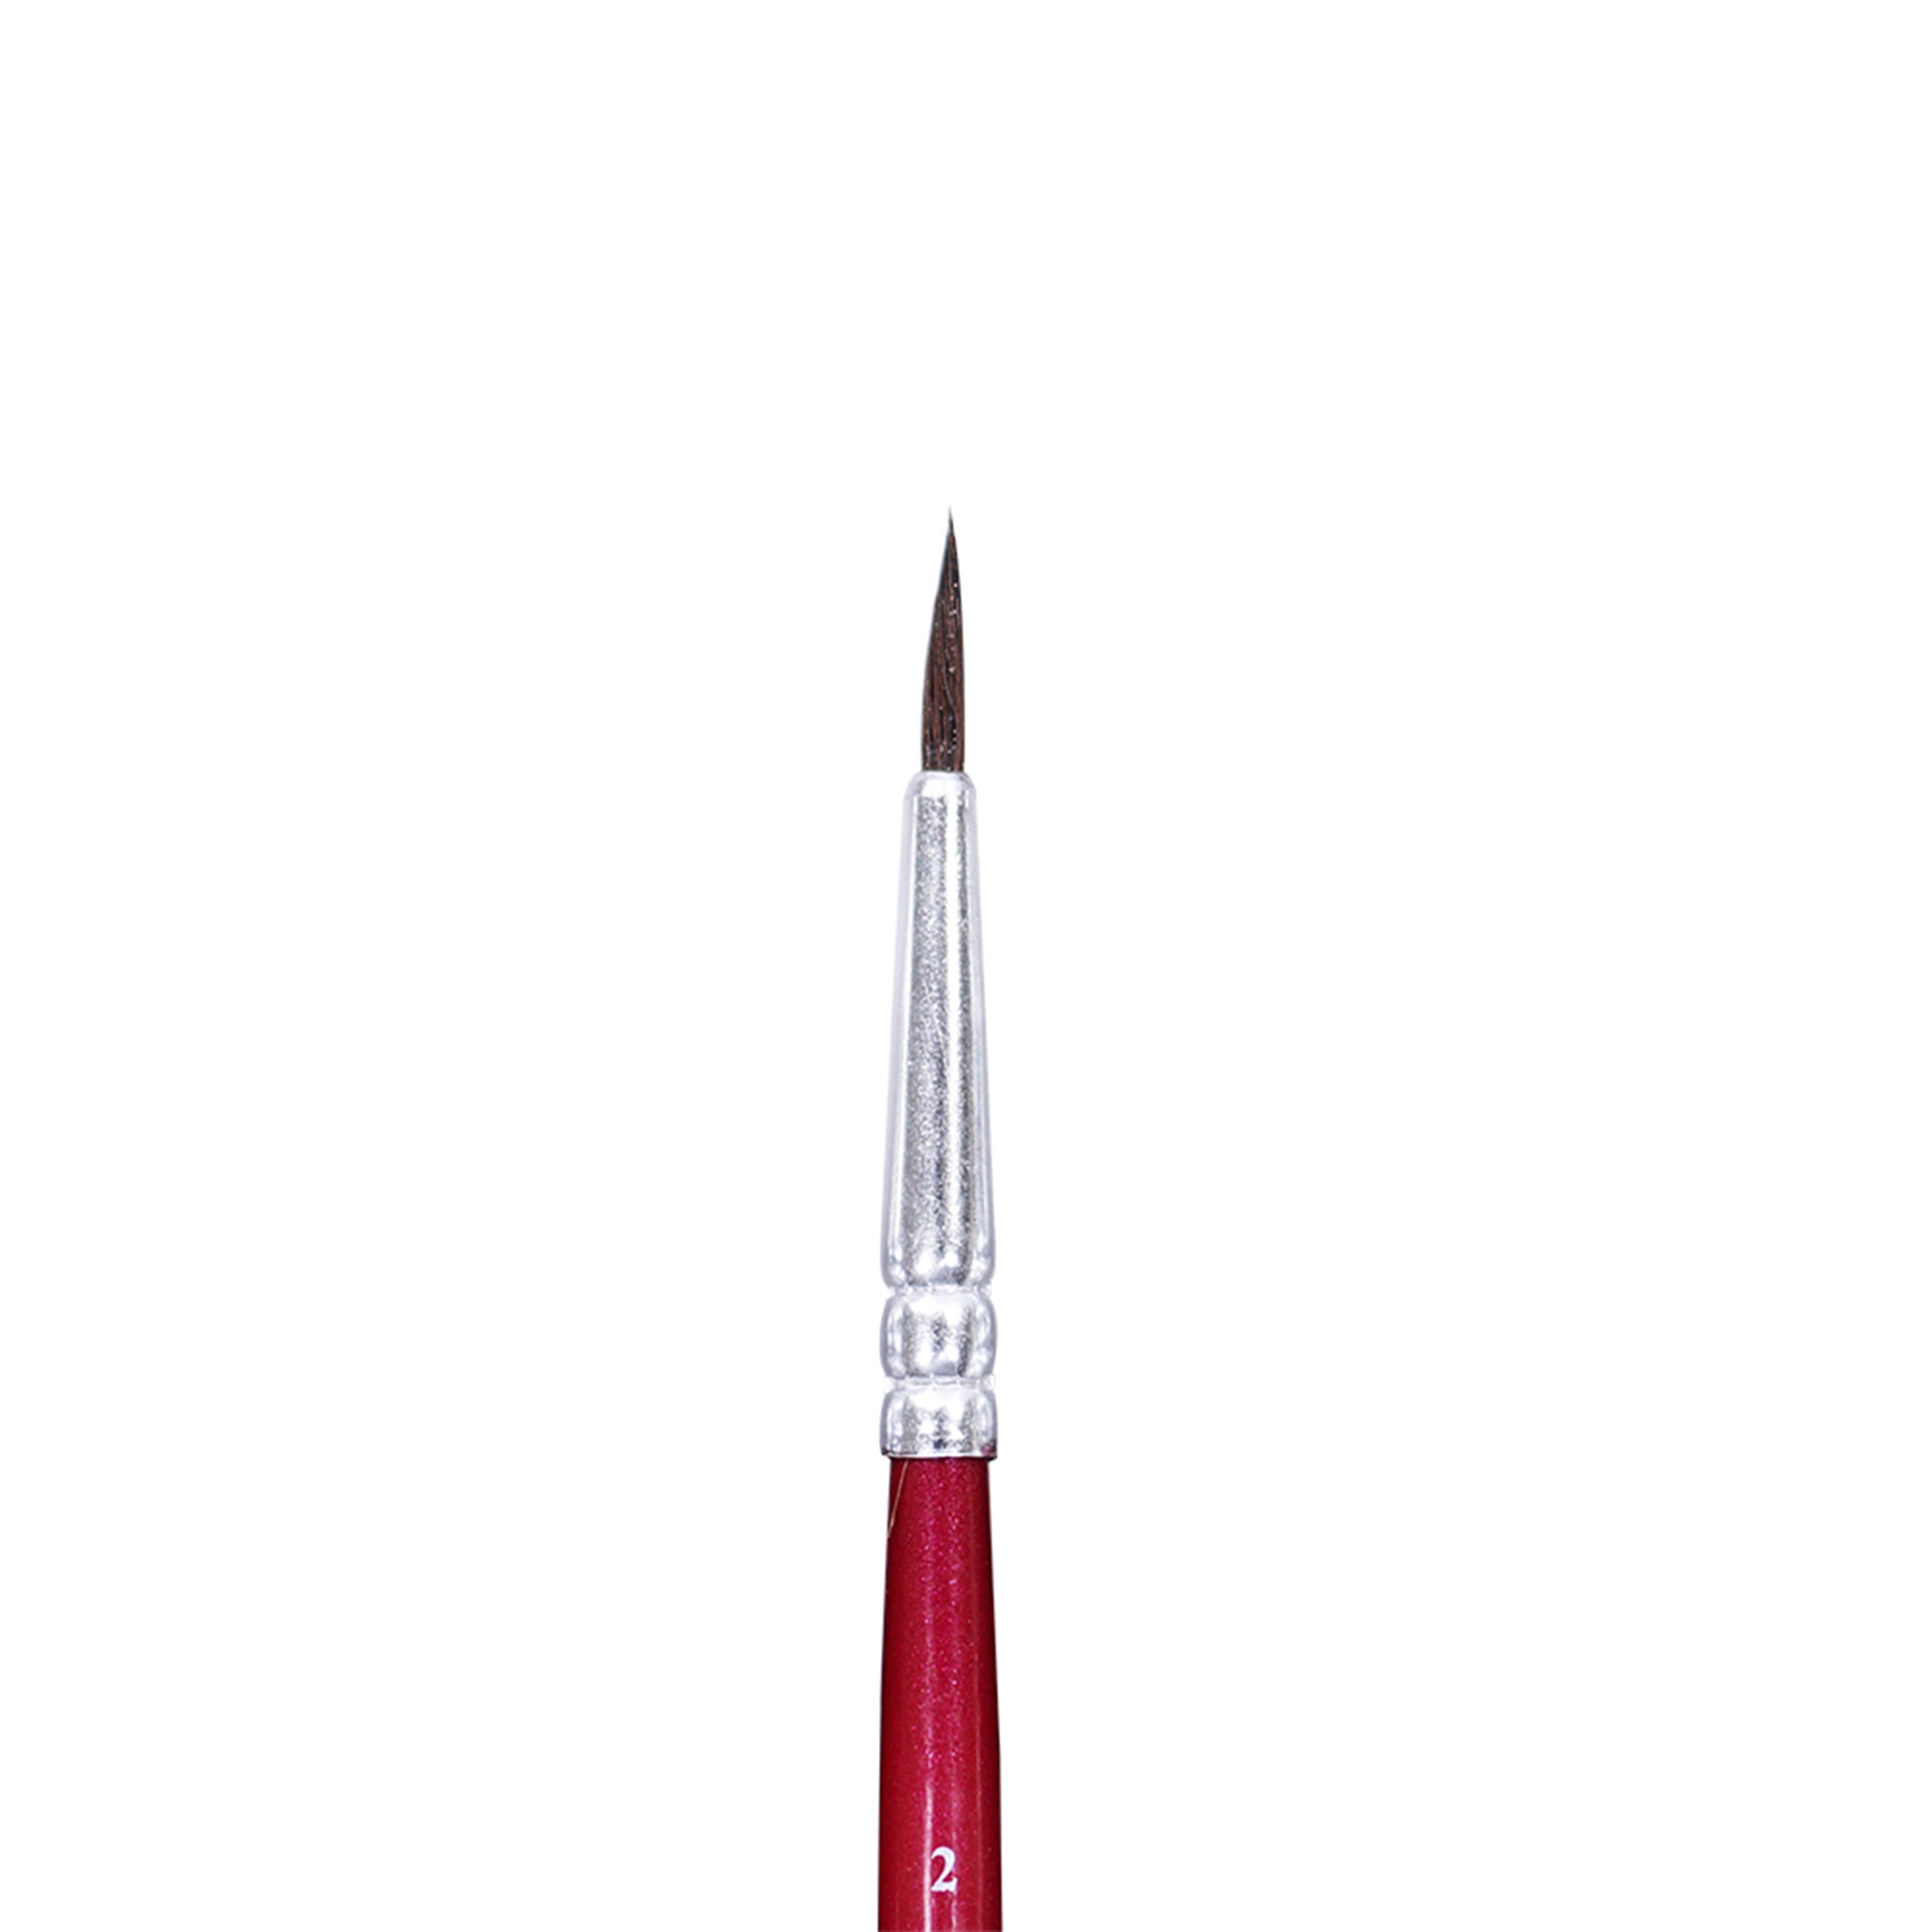 Faber Castell Paint Brush - Pony Hair Round Size 2, 1pc